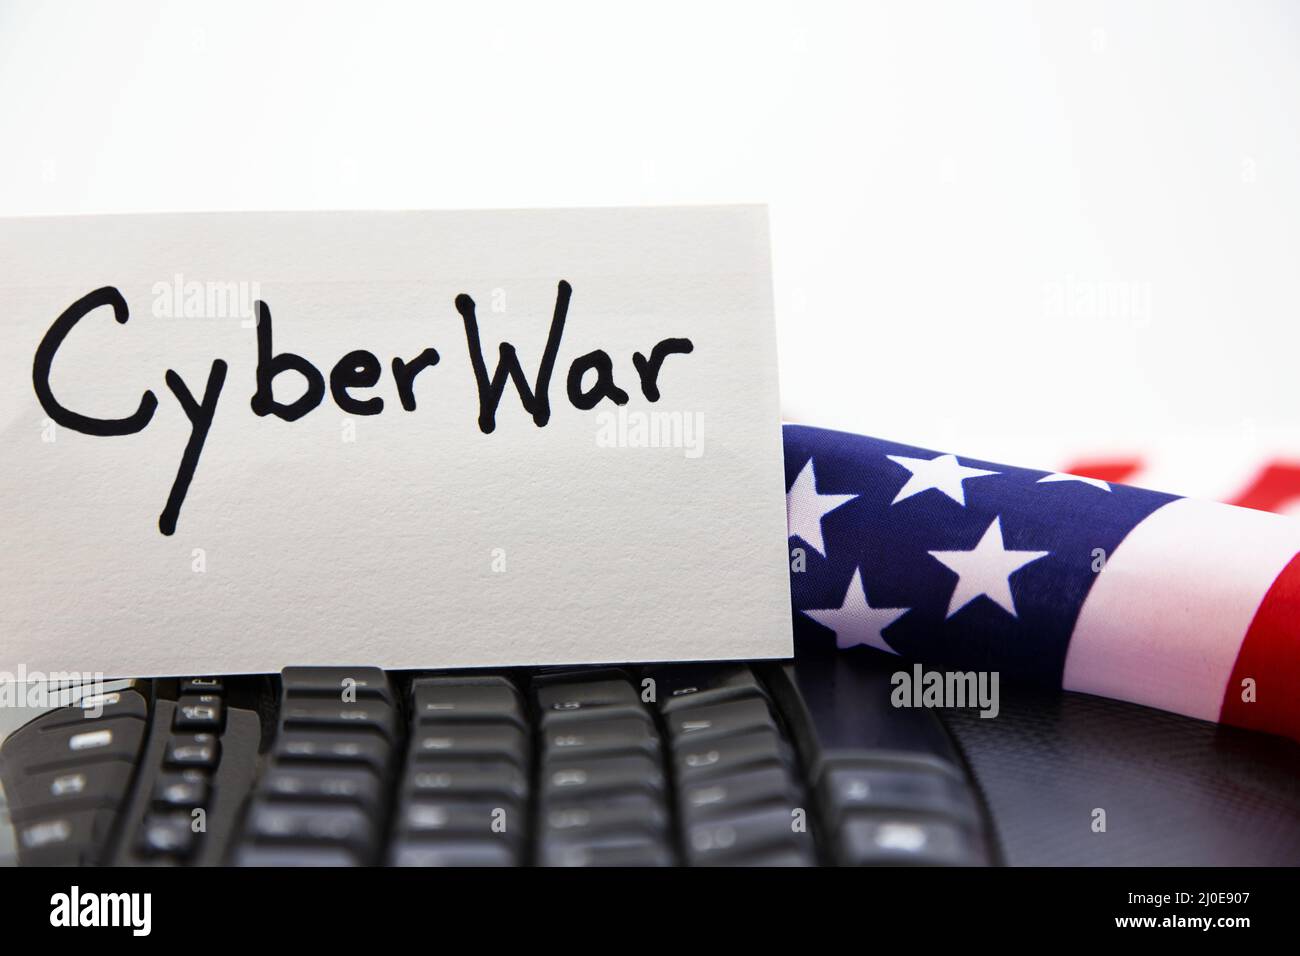 Conceptual image of national threats of cyberattacks against American infrastructure seen in flag, keyboard, and CYBERWAR card still life Stock Photo